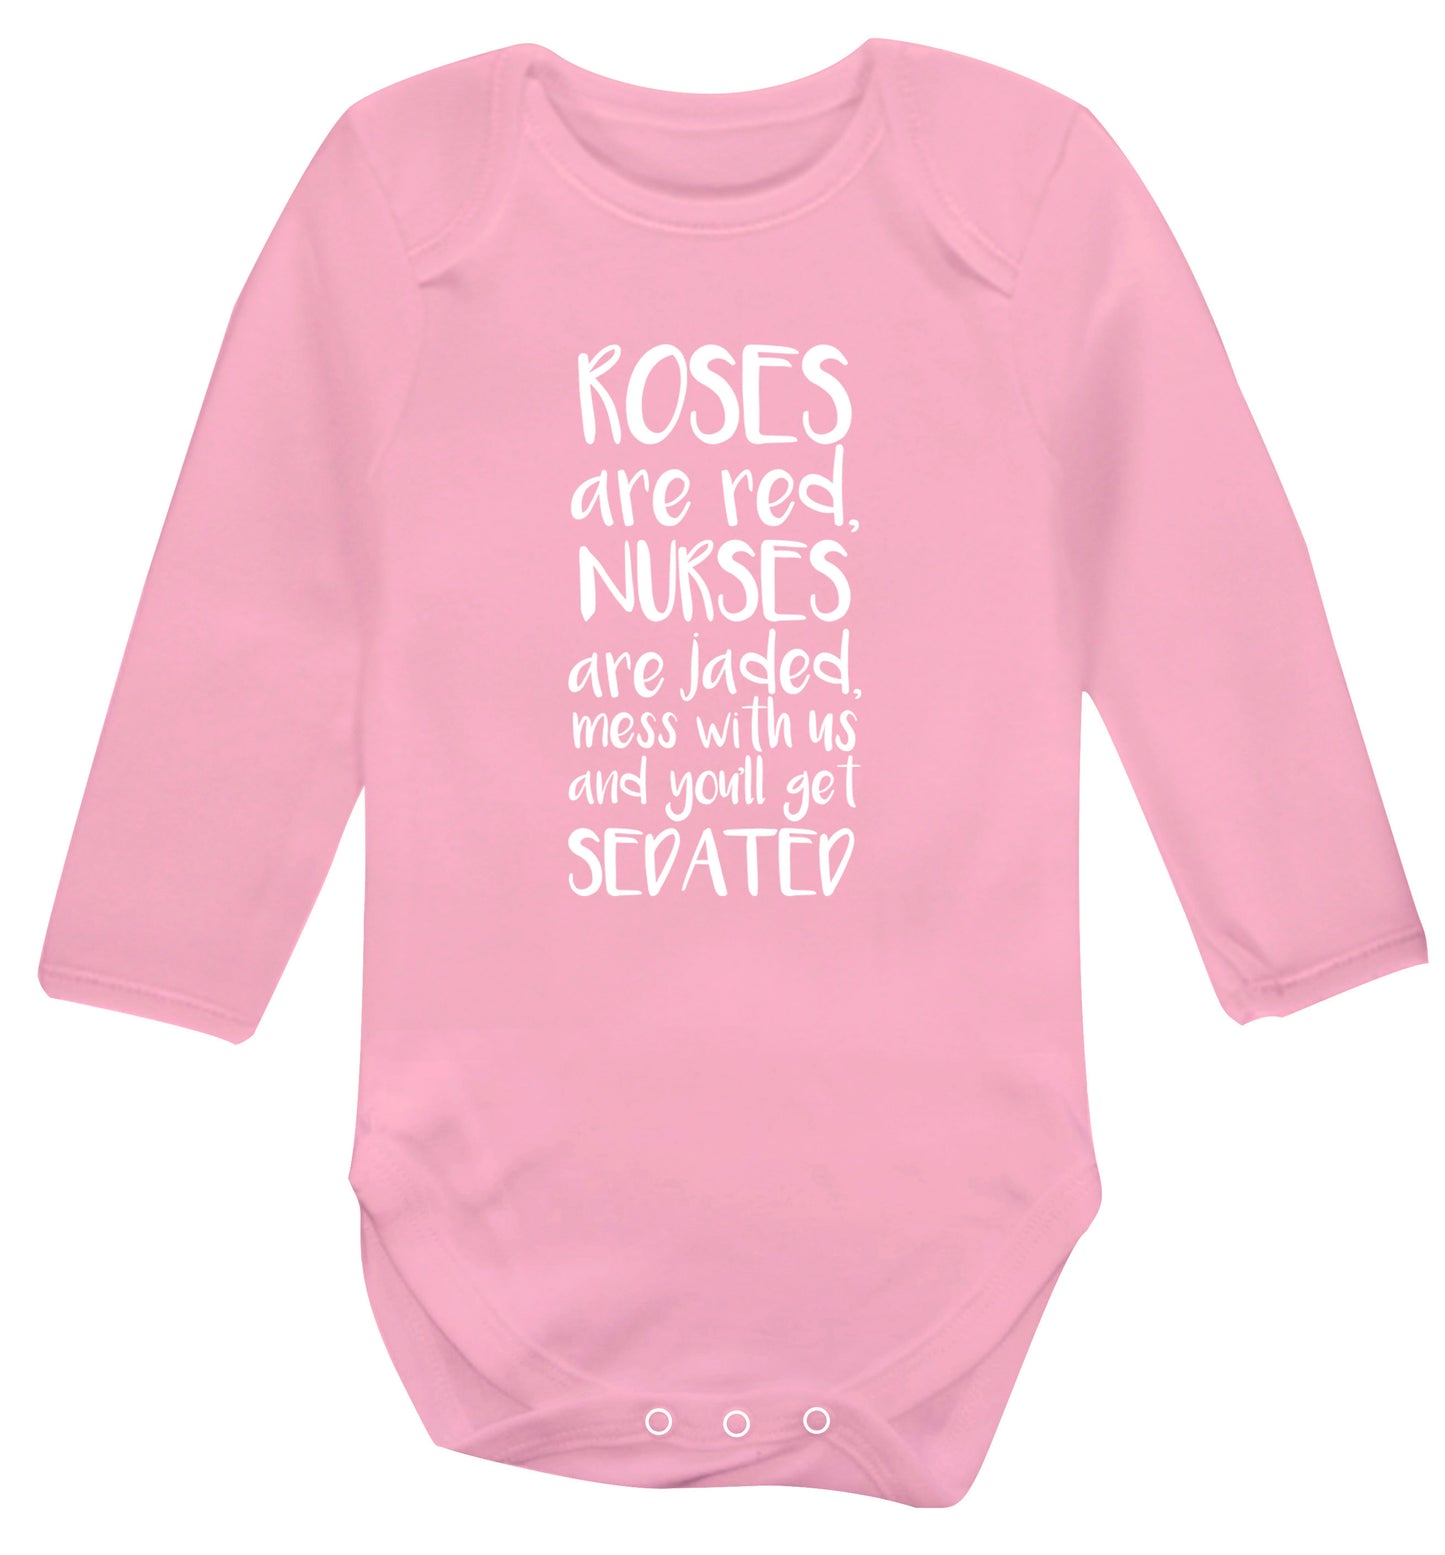 Roses are red, nurses are jaded, mess with us and you'll get sedated Baby Vest long sleeved pale pink 6-12 months